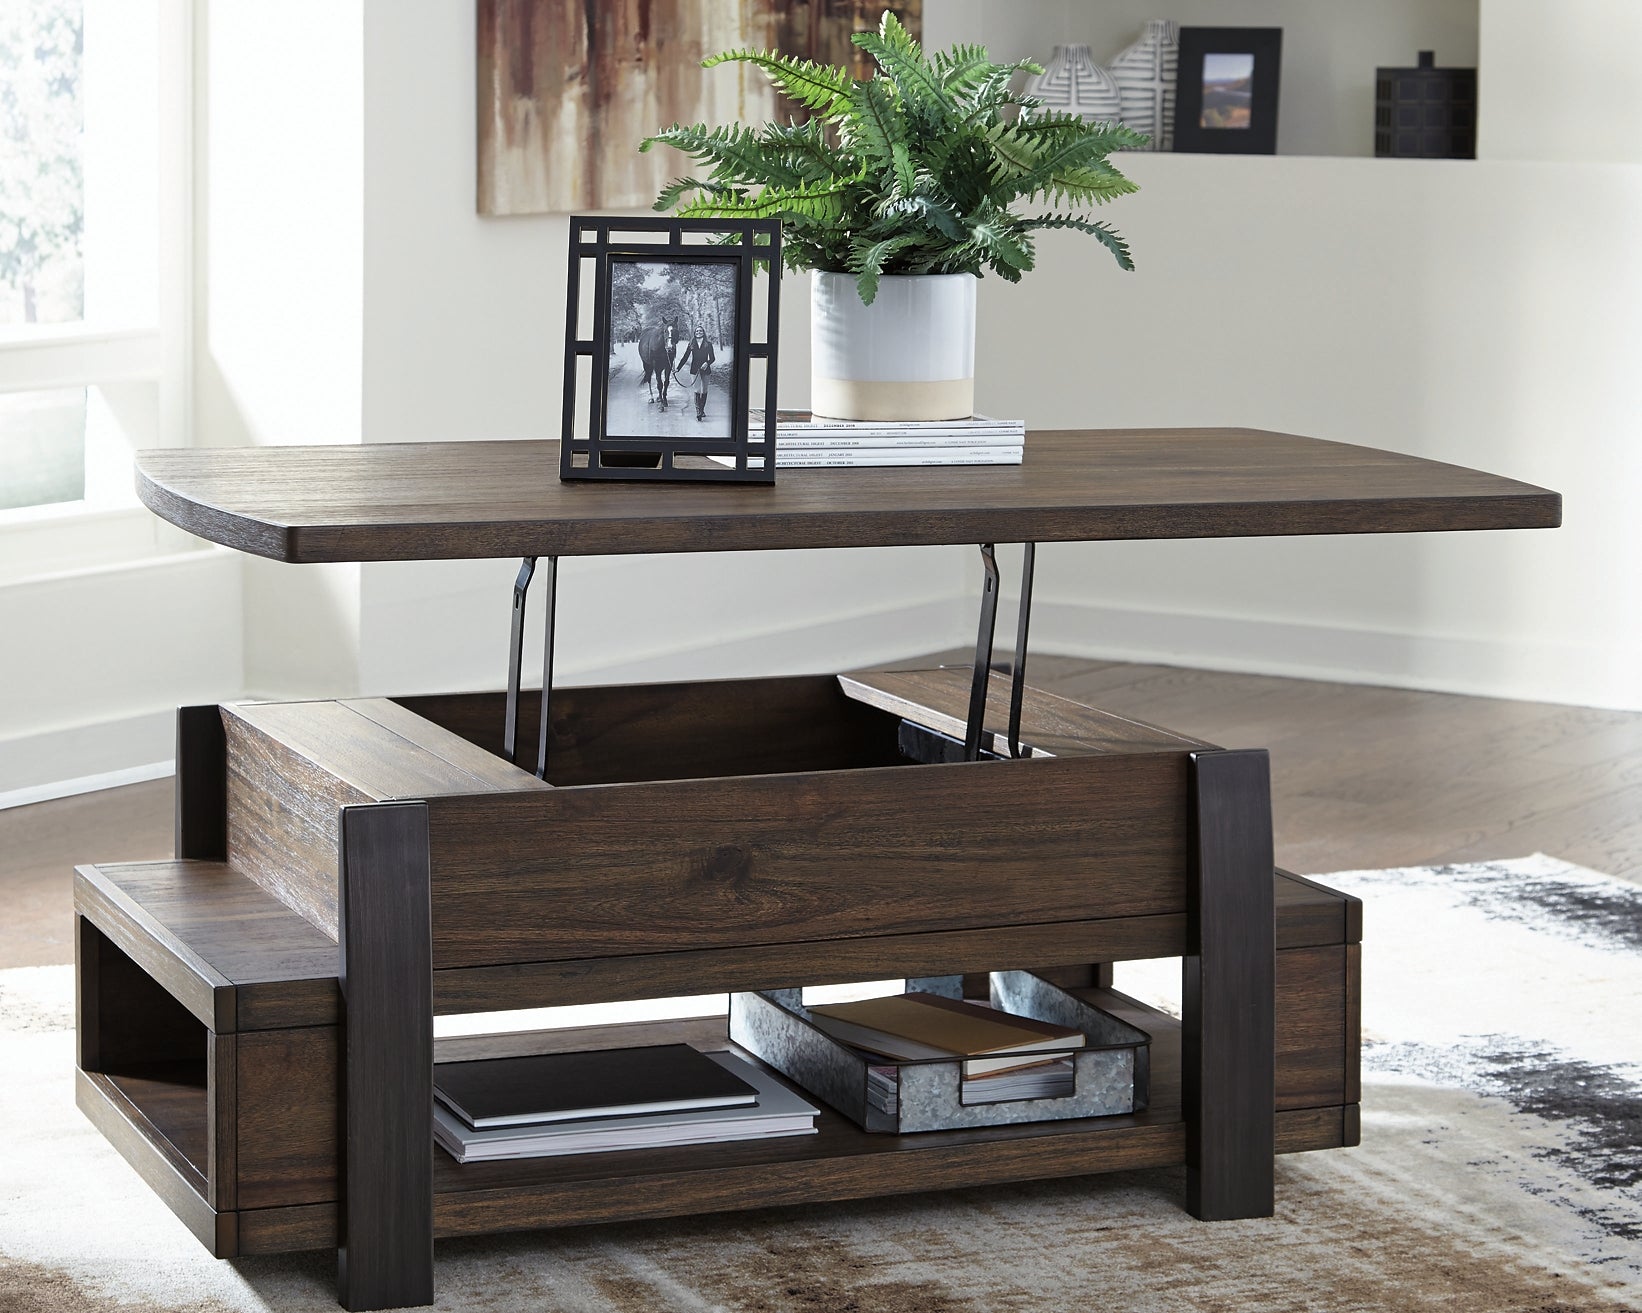 Vailbry Lift Top Cocktail Table Rent Wise Rent To Own Jacksonville, Florida